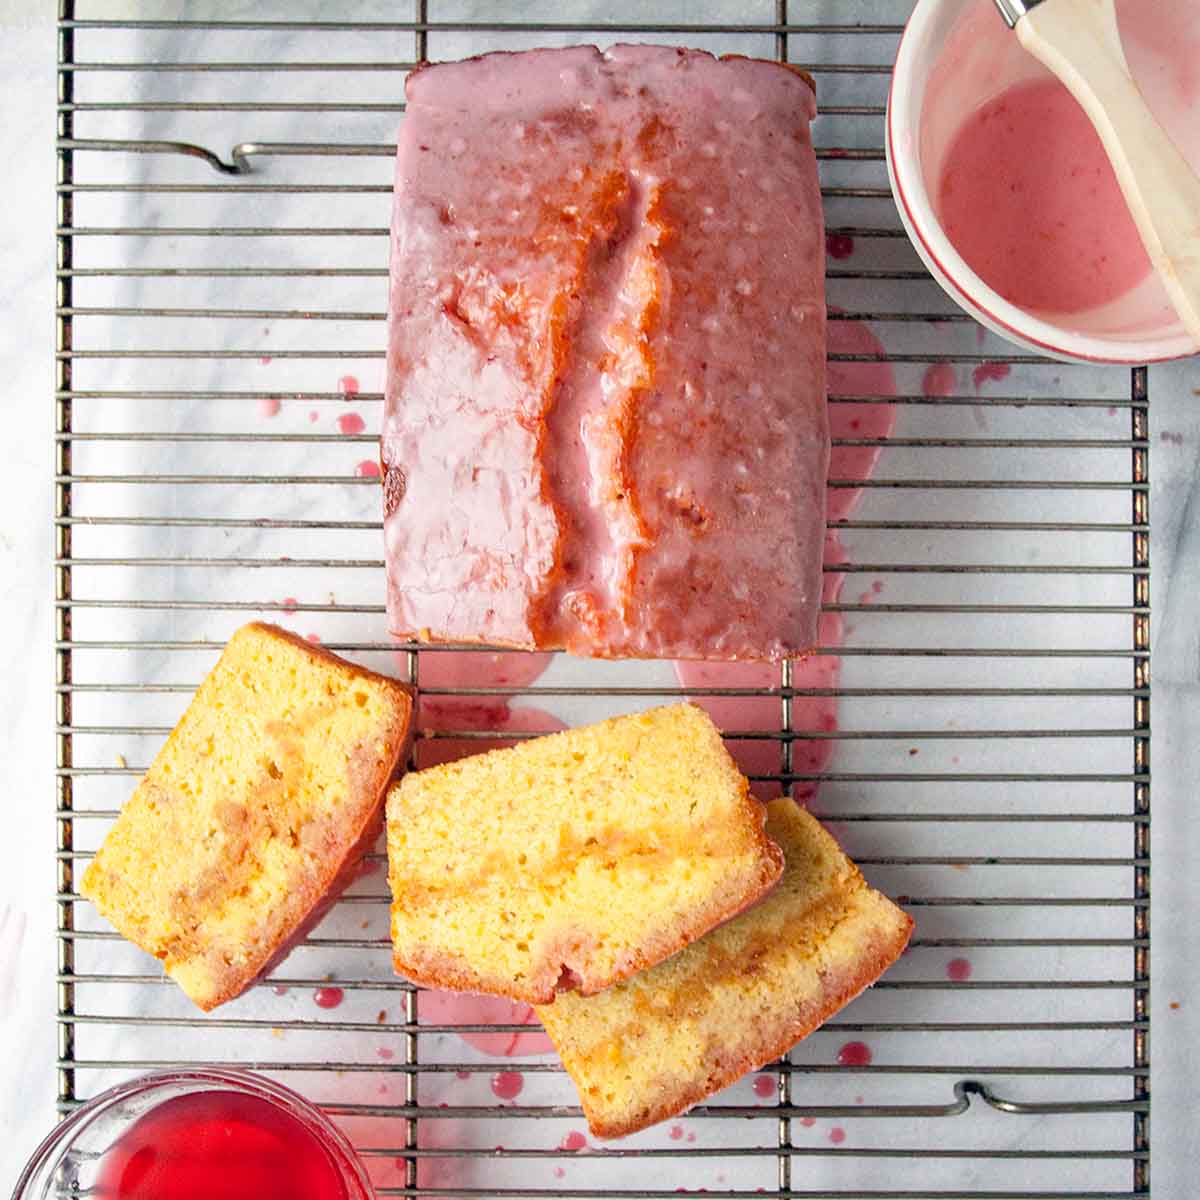 A blood orange pound cake on a wire rack with glaze and sugar syrup, three slices cut.